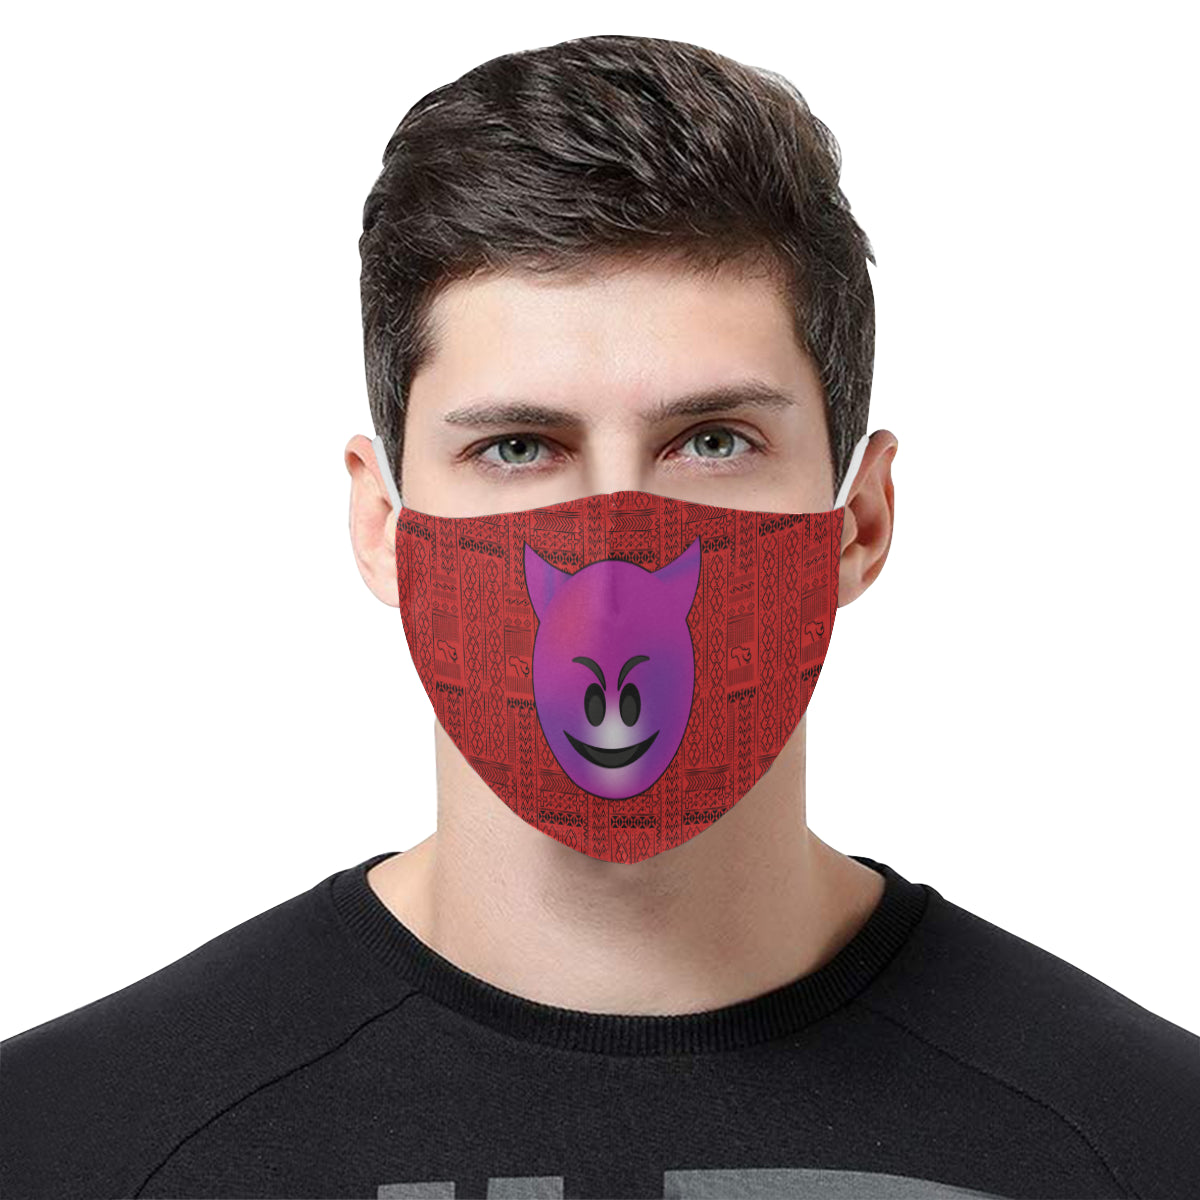 Mischief Tribal Print Emoji Cotton Fabric Face Mask with Filter Slot and Adjustable Strap - Non-medical use (2 Filters Included)